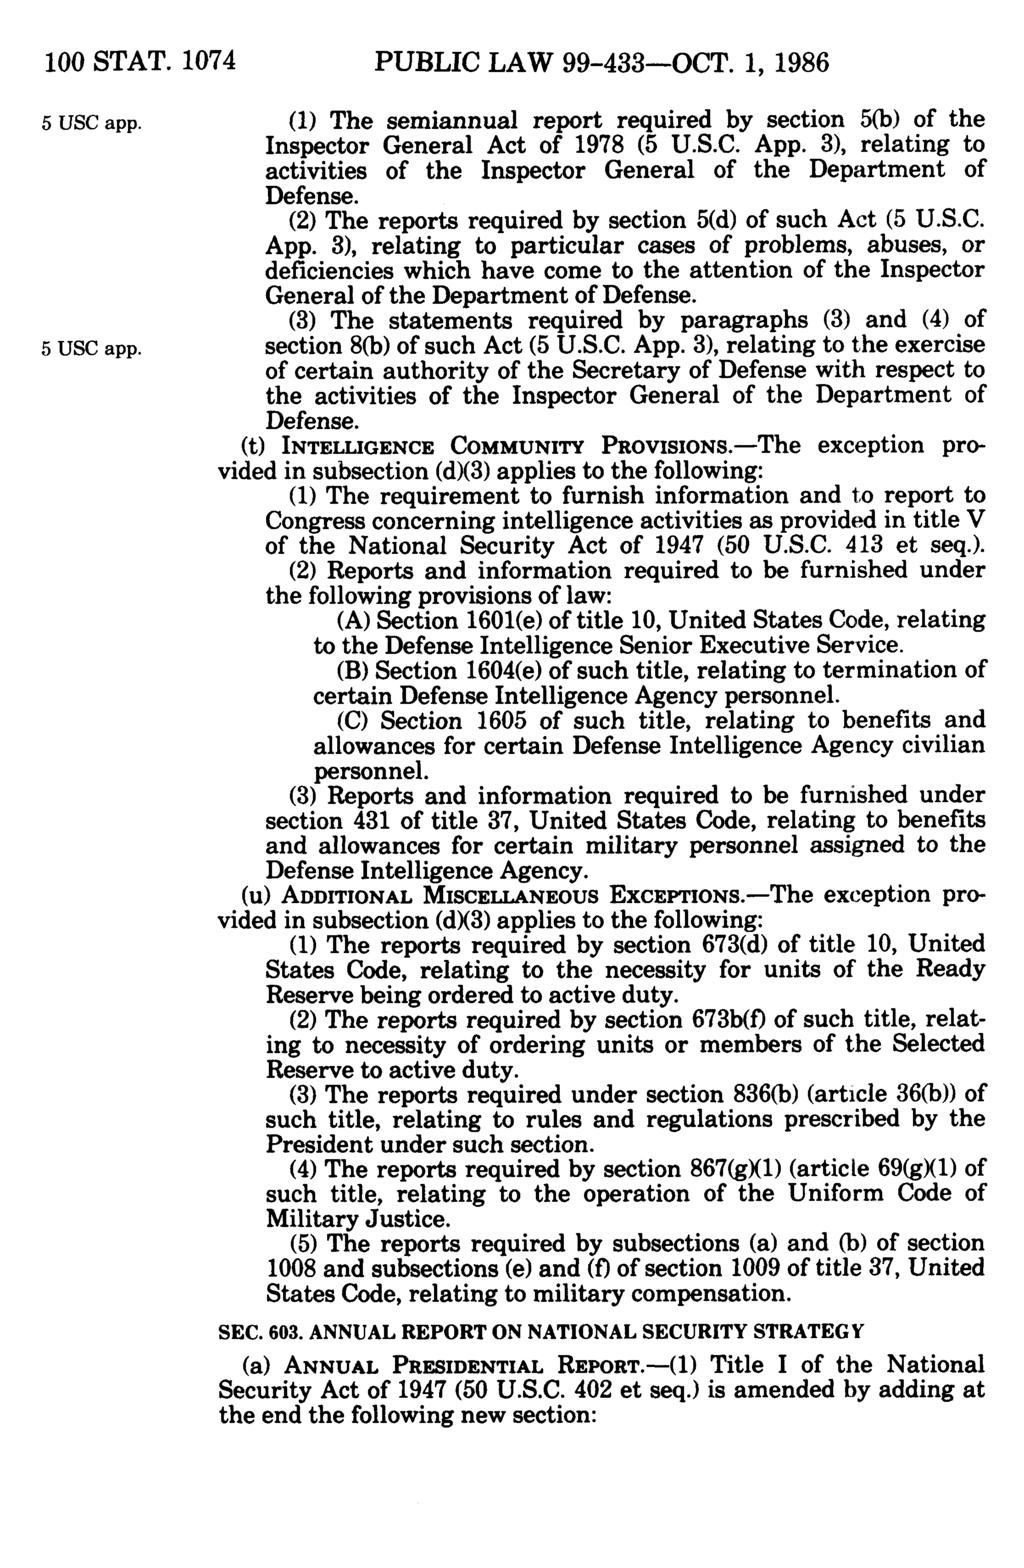 100 STAT. 1074 PUBLIC LAW 99-433-OCT. 1, 1986 5 USC app. (1) The semiannual report required by section 5(b) of the Inspector General Act of 1978 (5 U.S.C. App.